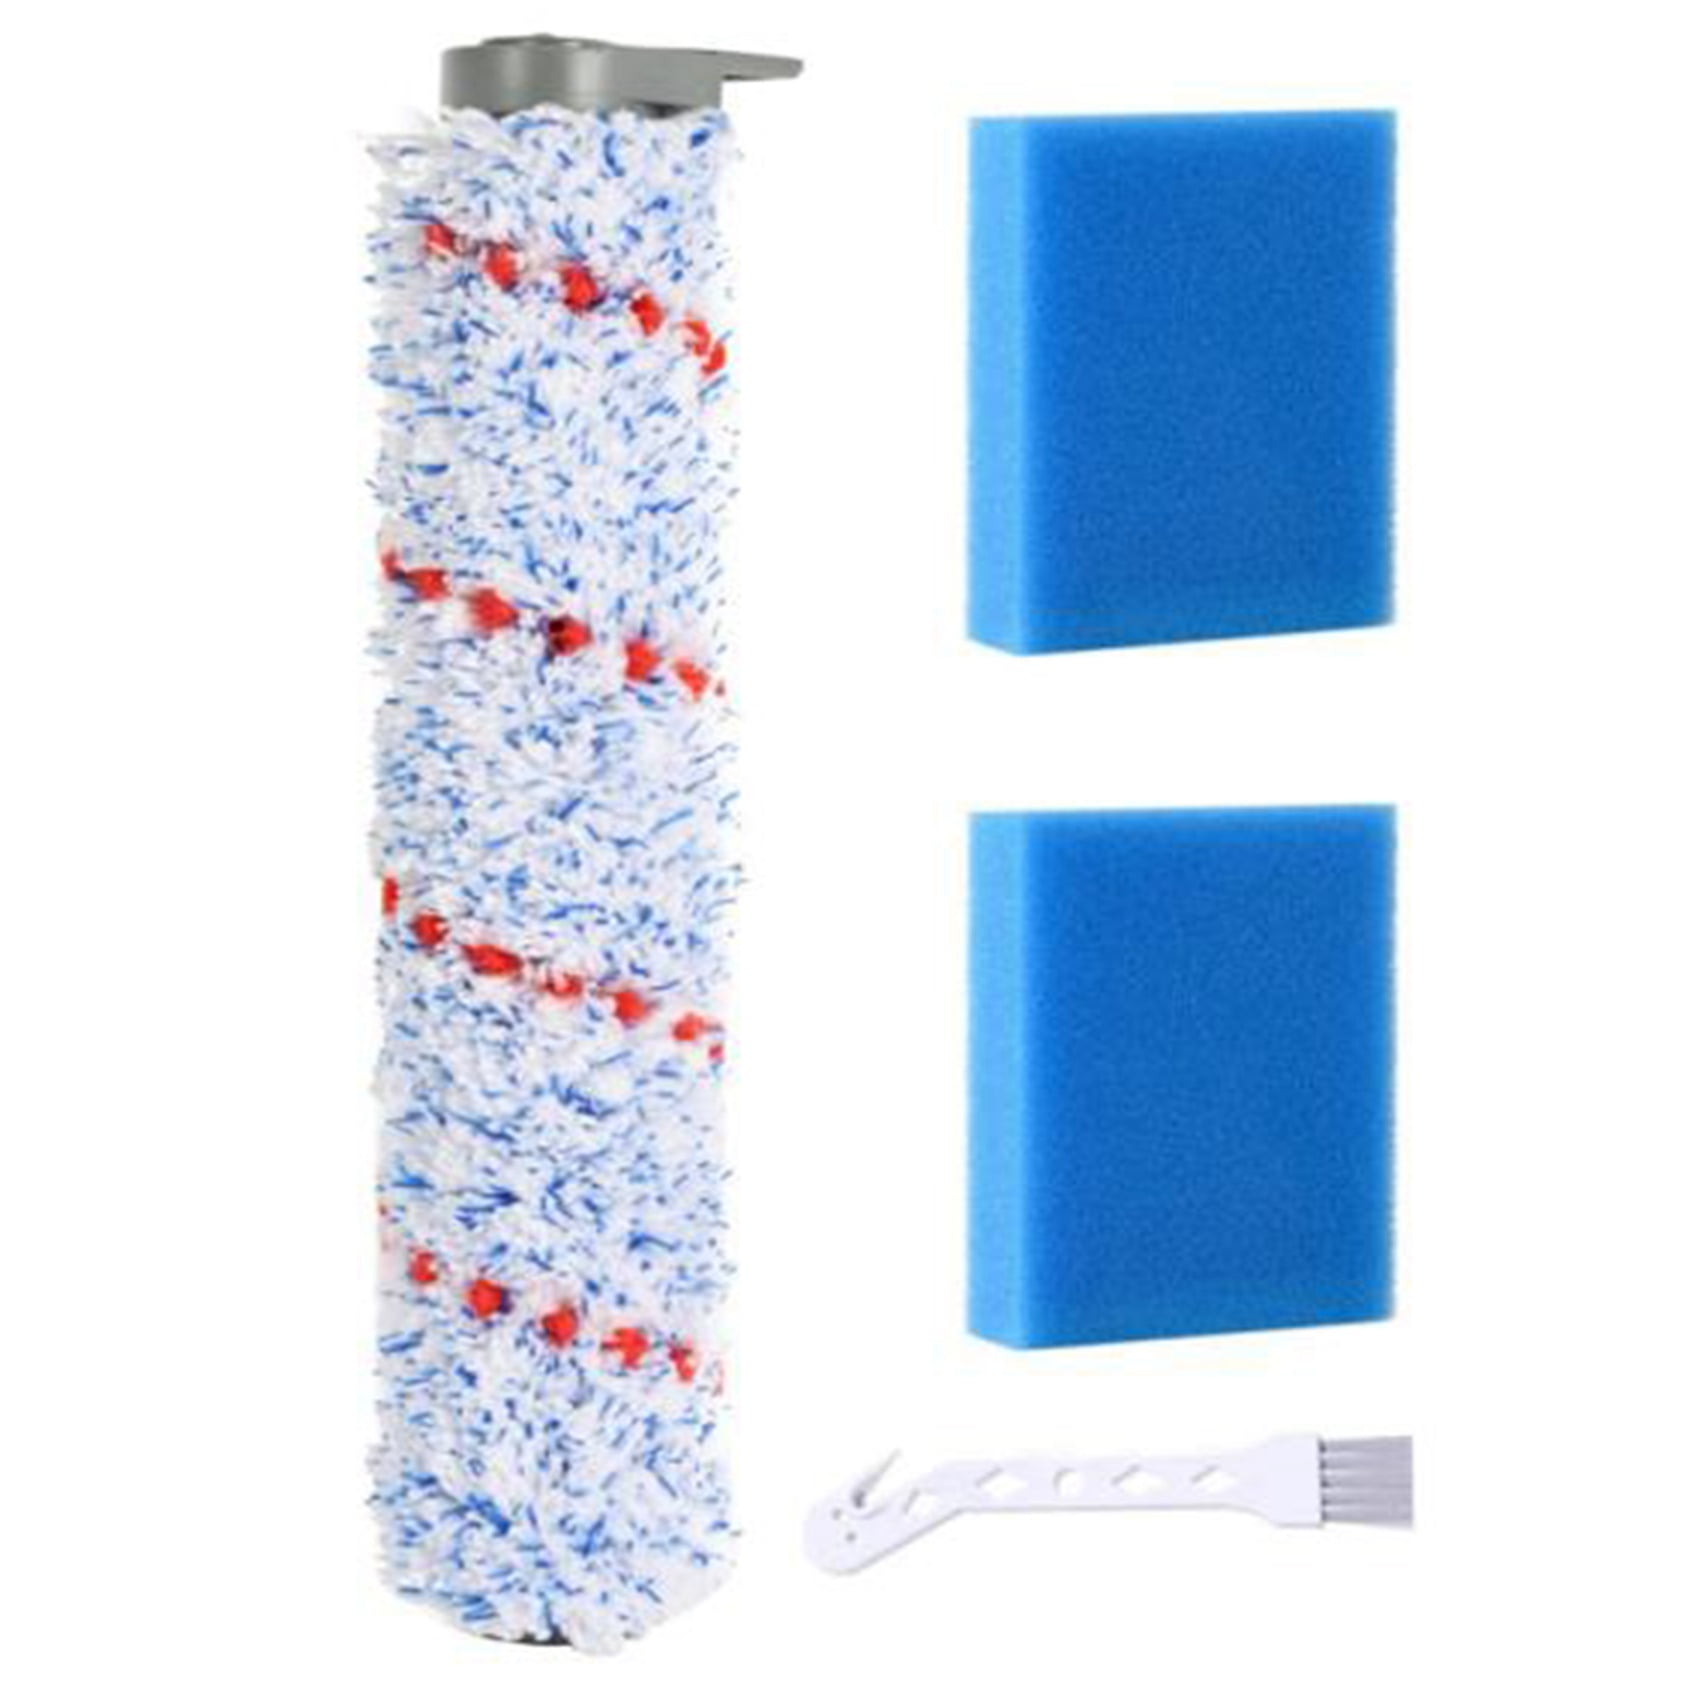 Details about   For Tineco IFloor HF10E-01 Wet Dry Vacuum Cleaner Brush Roll Roller Replacement 